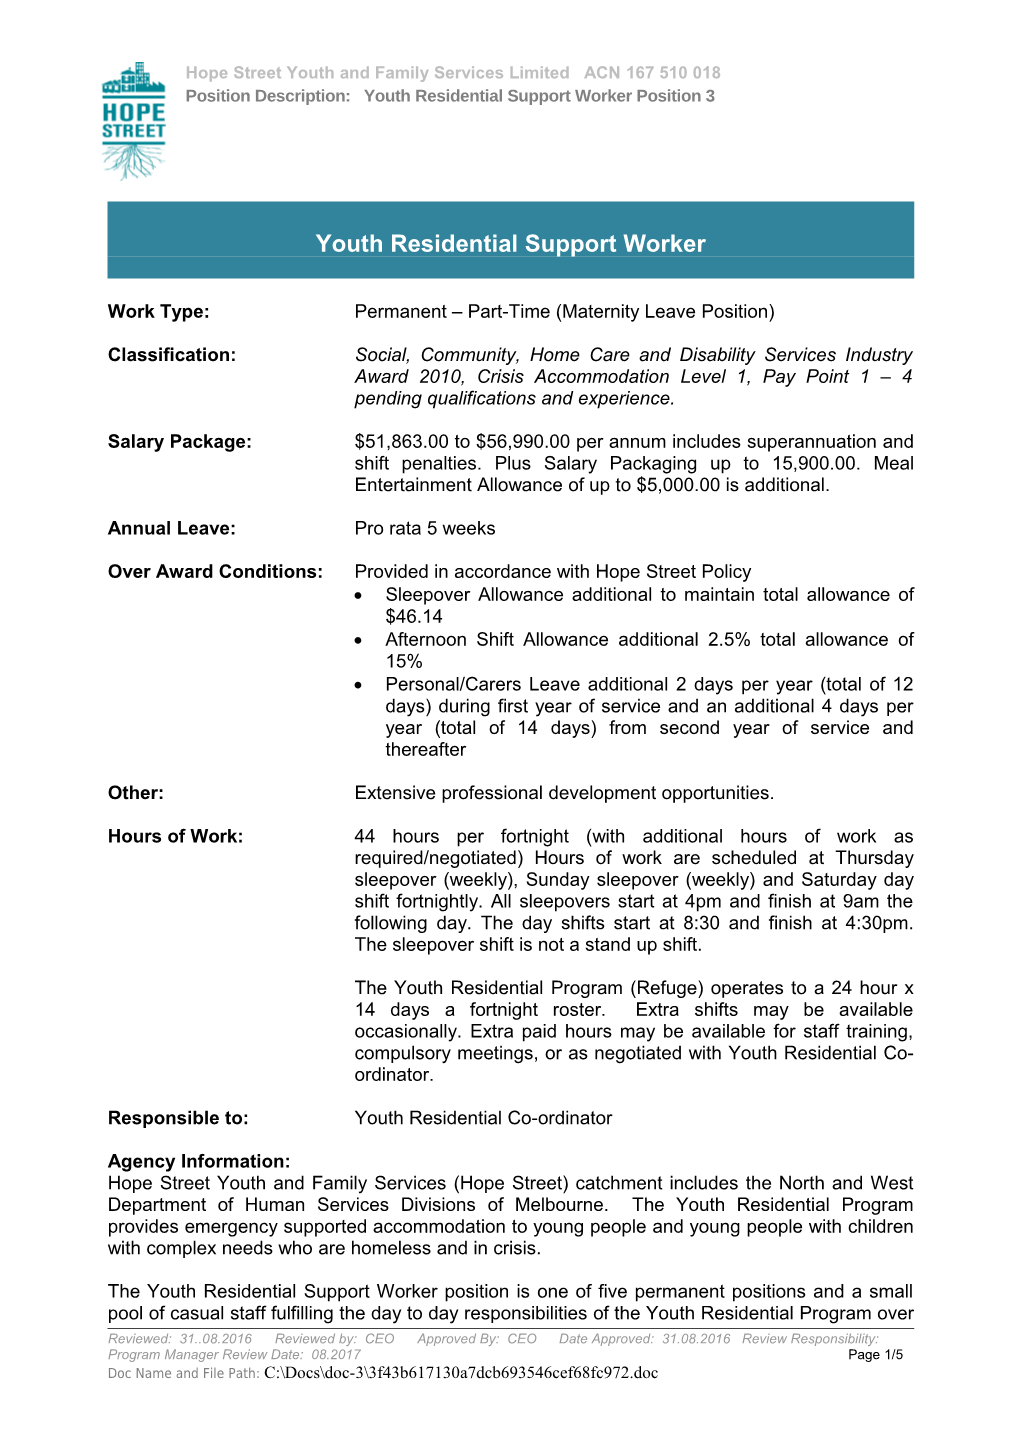 Youth Residential Support Worker